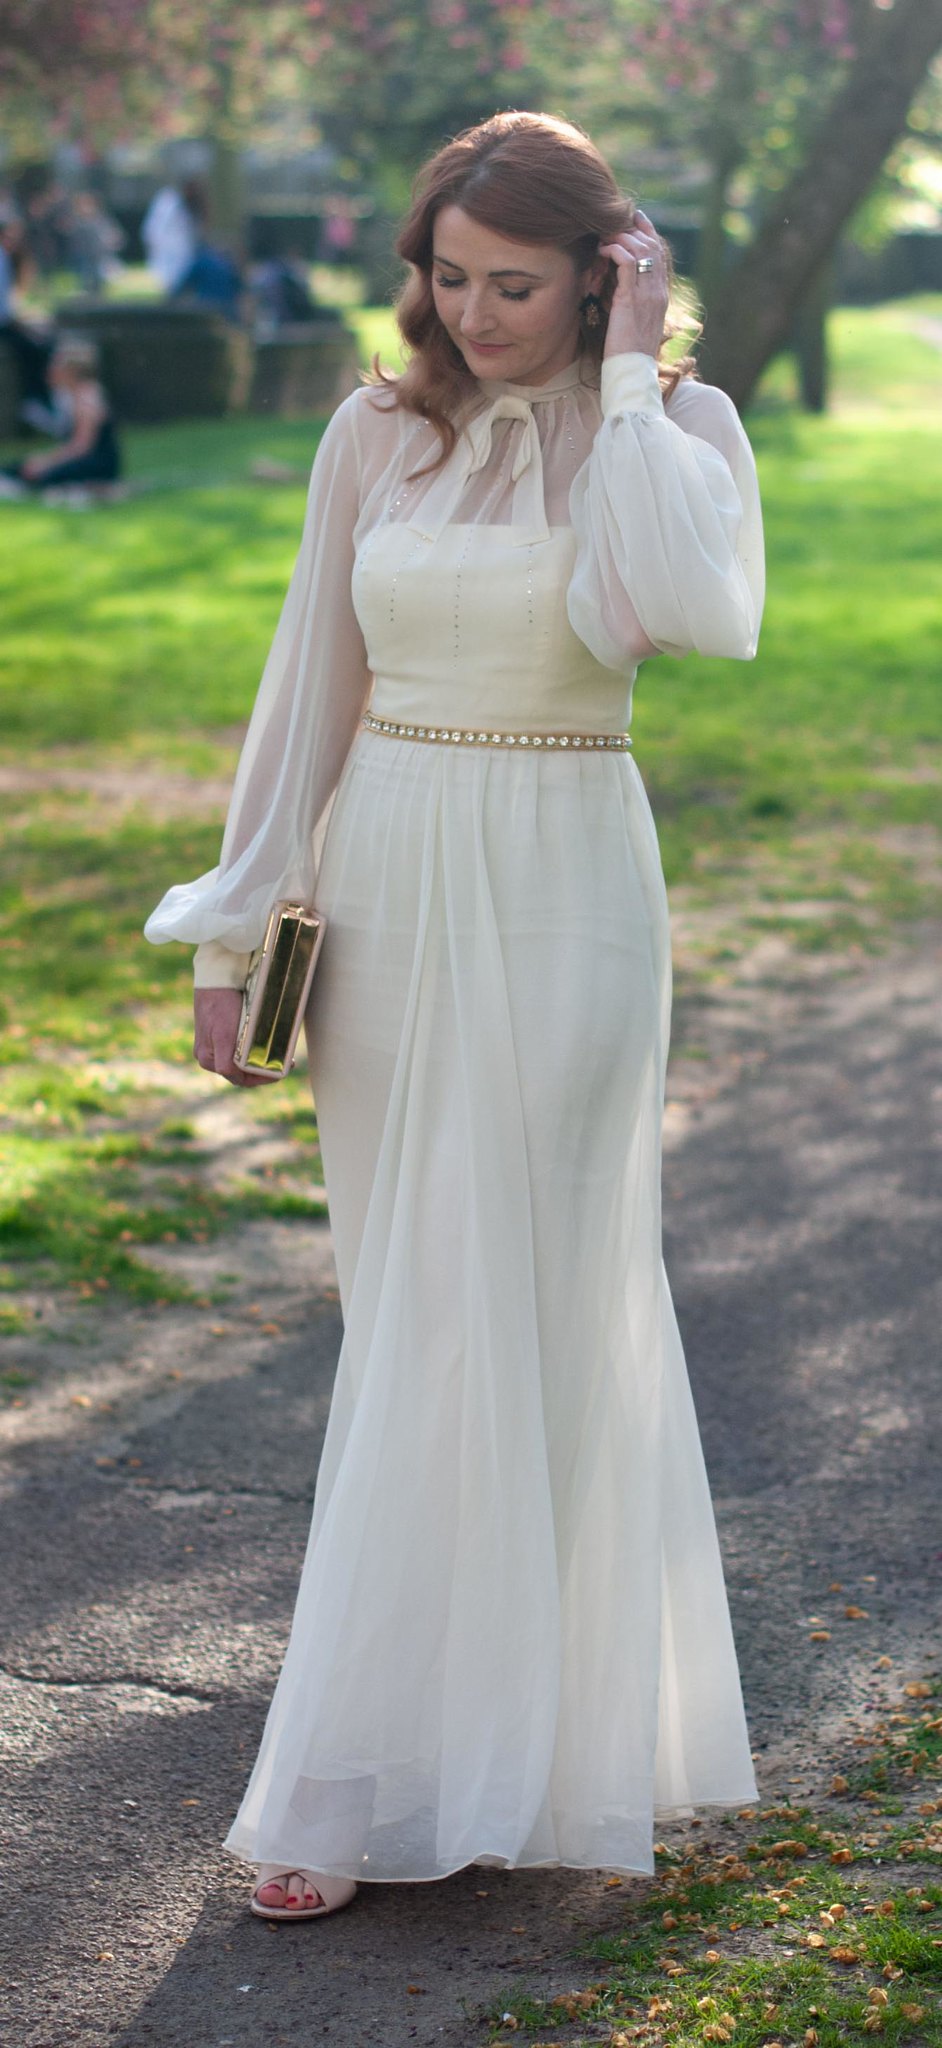 An Ethereal Vintage Evening Dress for the UK Blog Awards: Ivory 70s chiffon dress with balloon sleeves, rhinestones on the bodice and a high neck with pussy bow | Not Dressed As Lamb, over 40 style blog